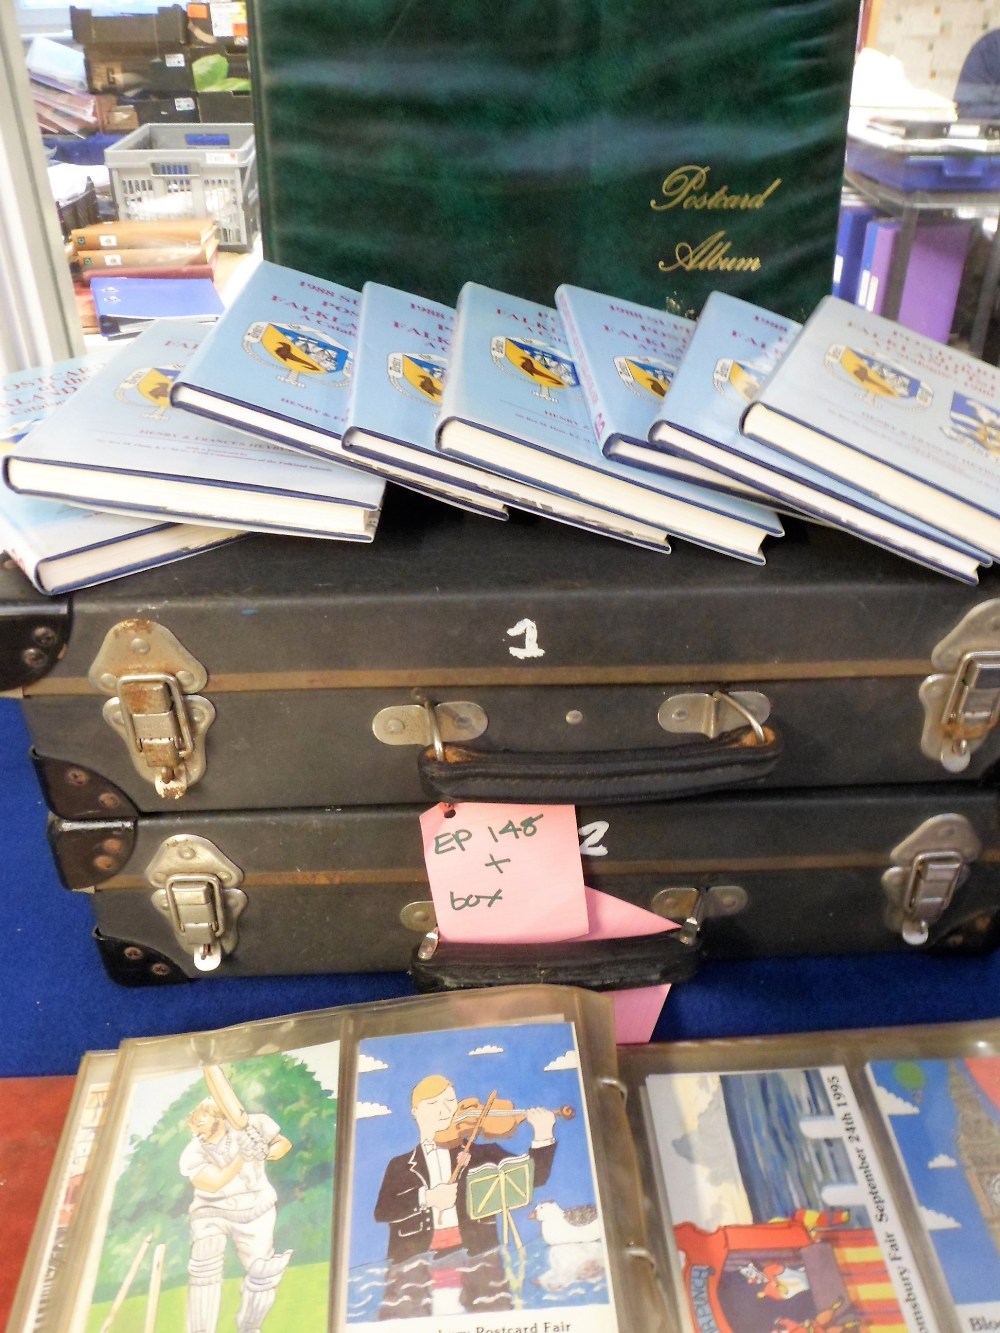 Postcard Accessories and Books. 2 collectors cases (some rusting and wear), postcard album with